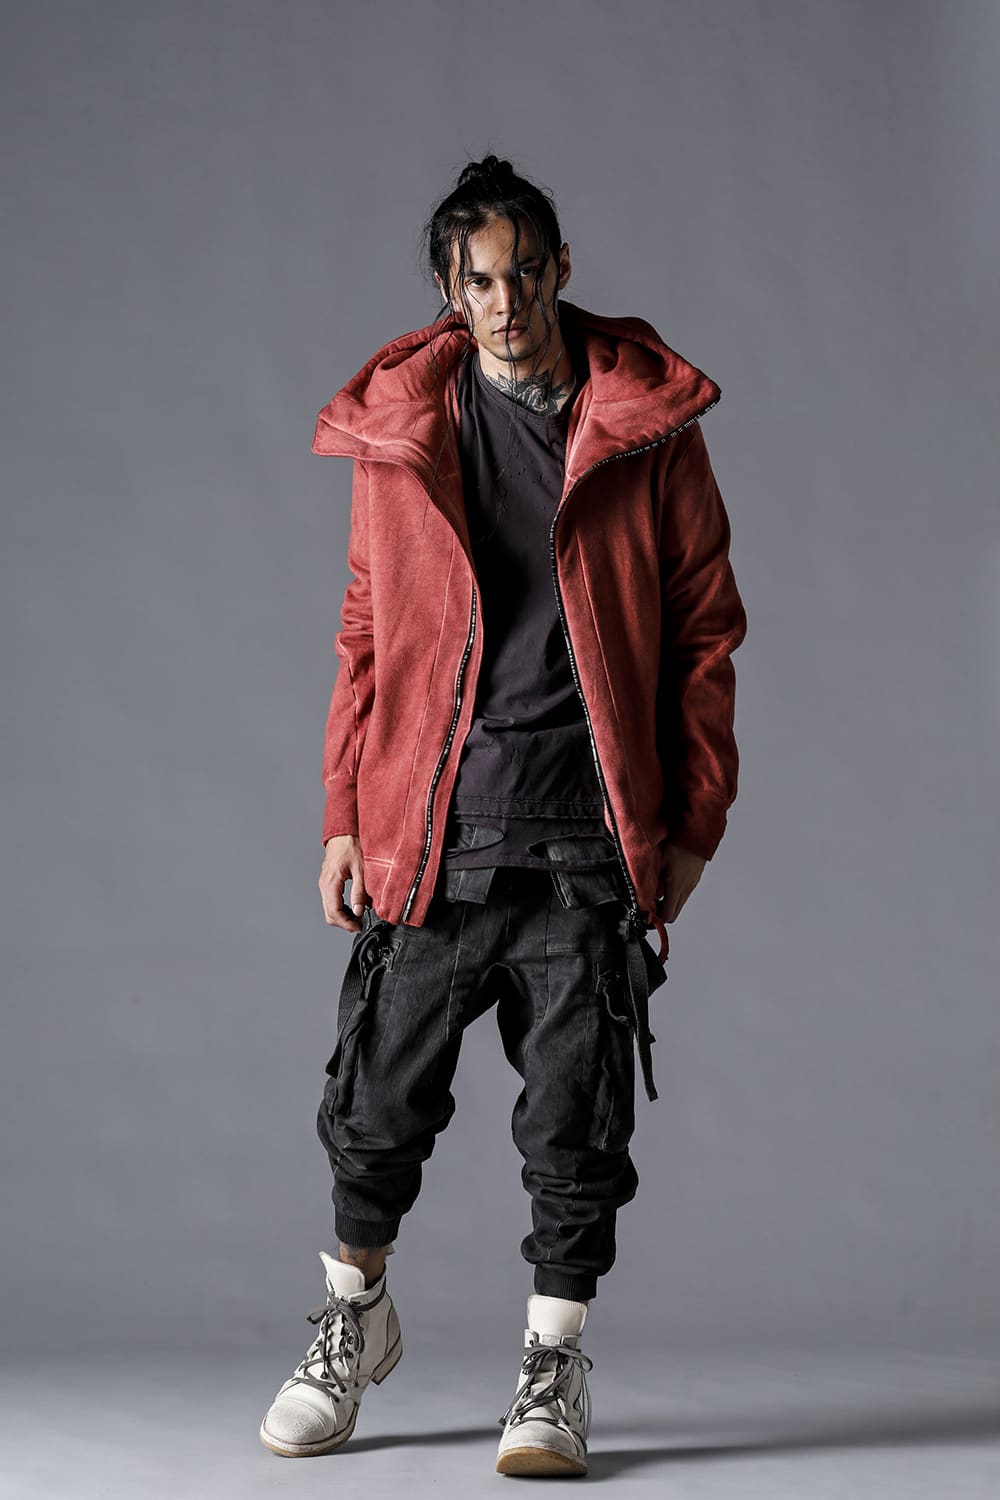 Arrival Information] D.HYGEN 23SS collection is available now